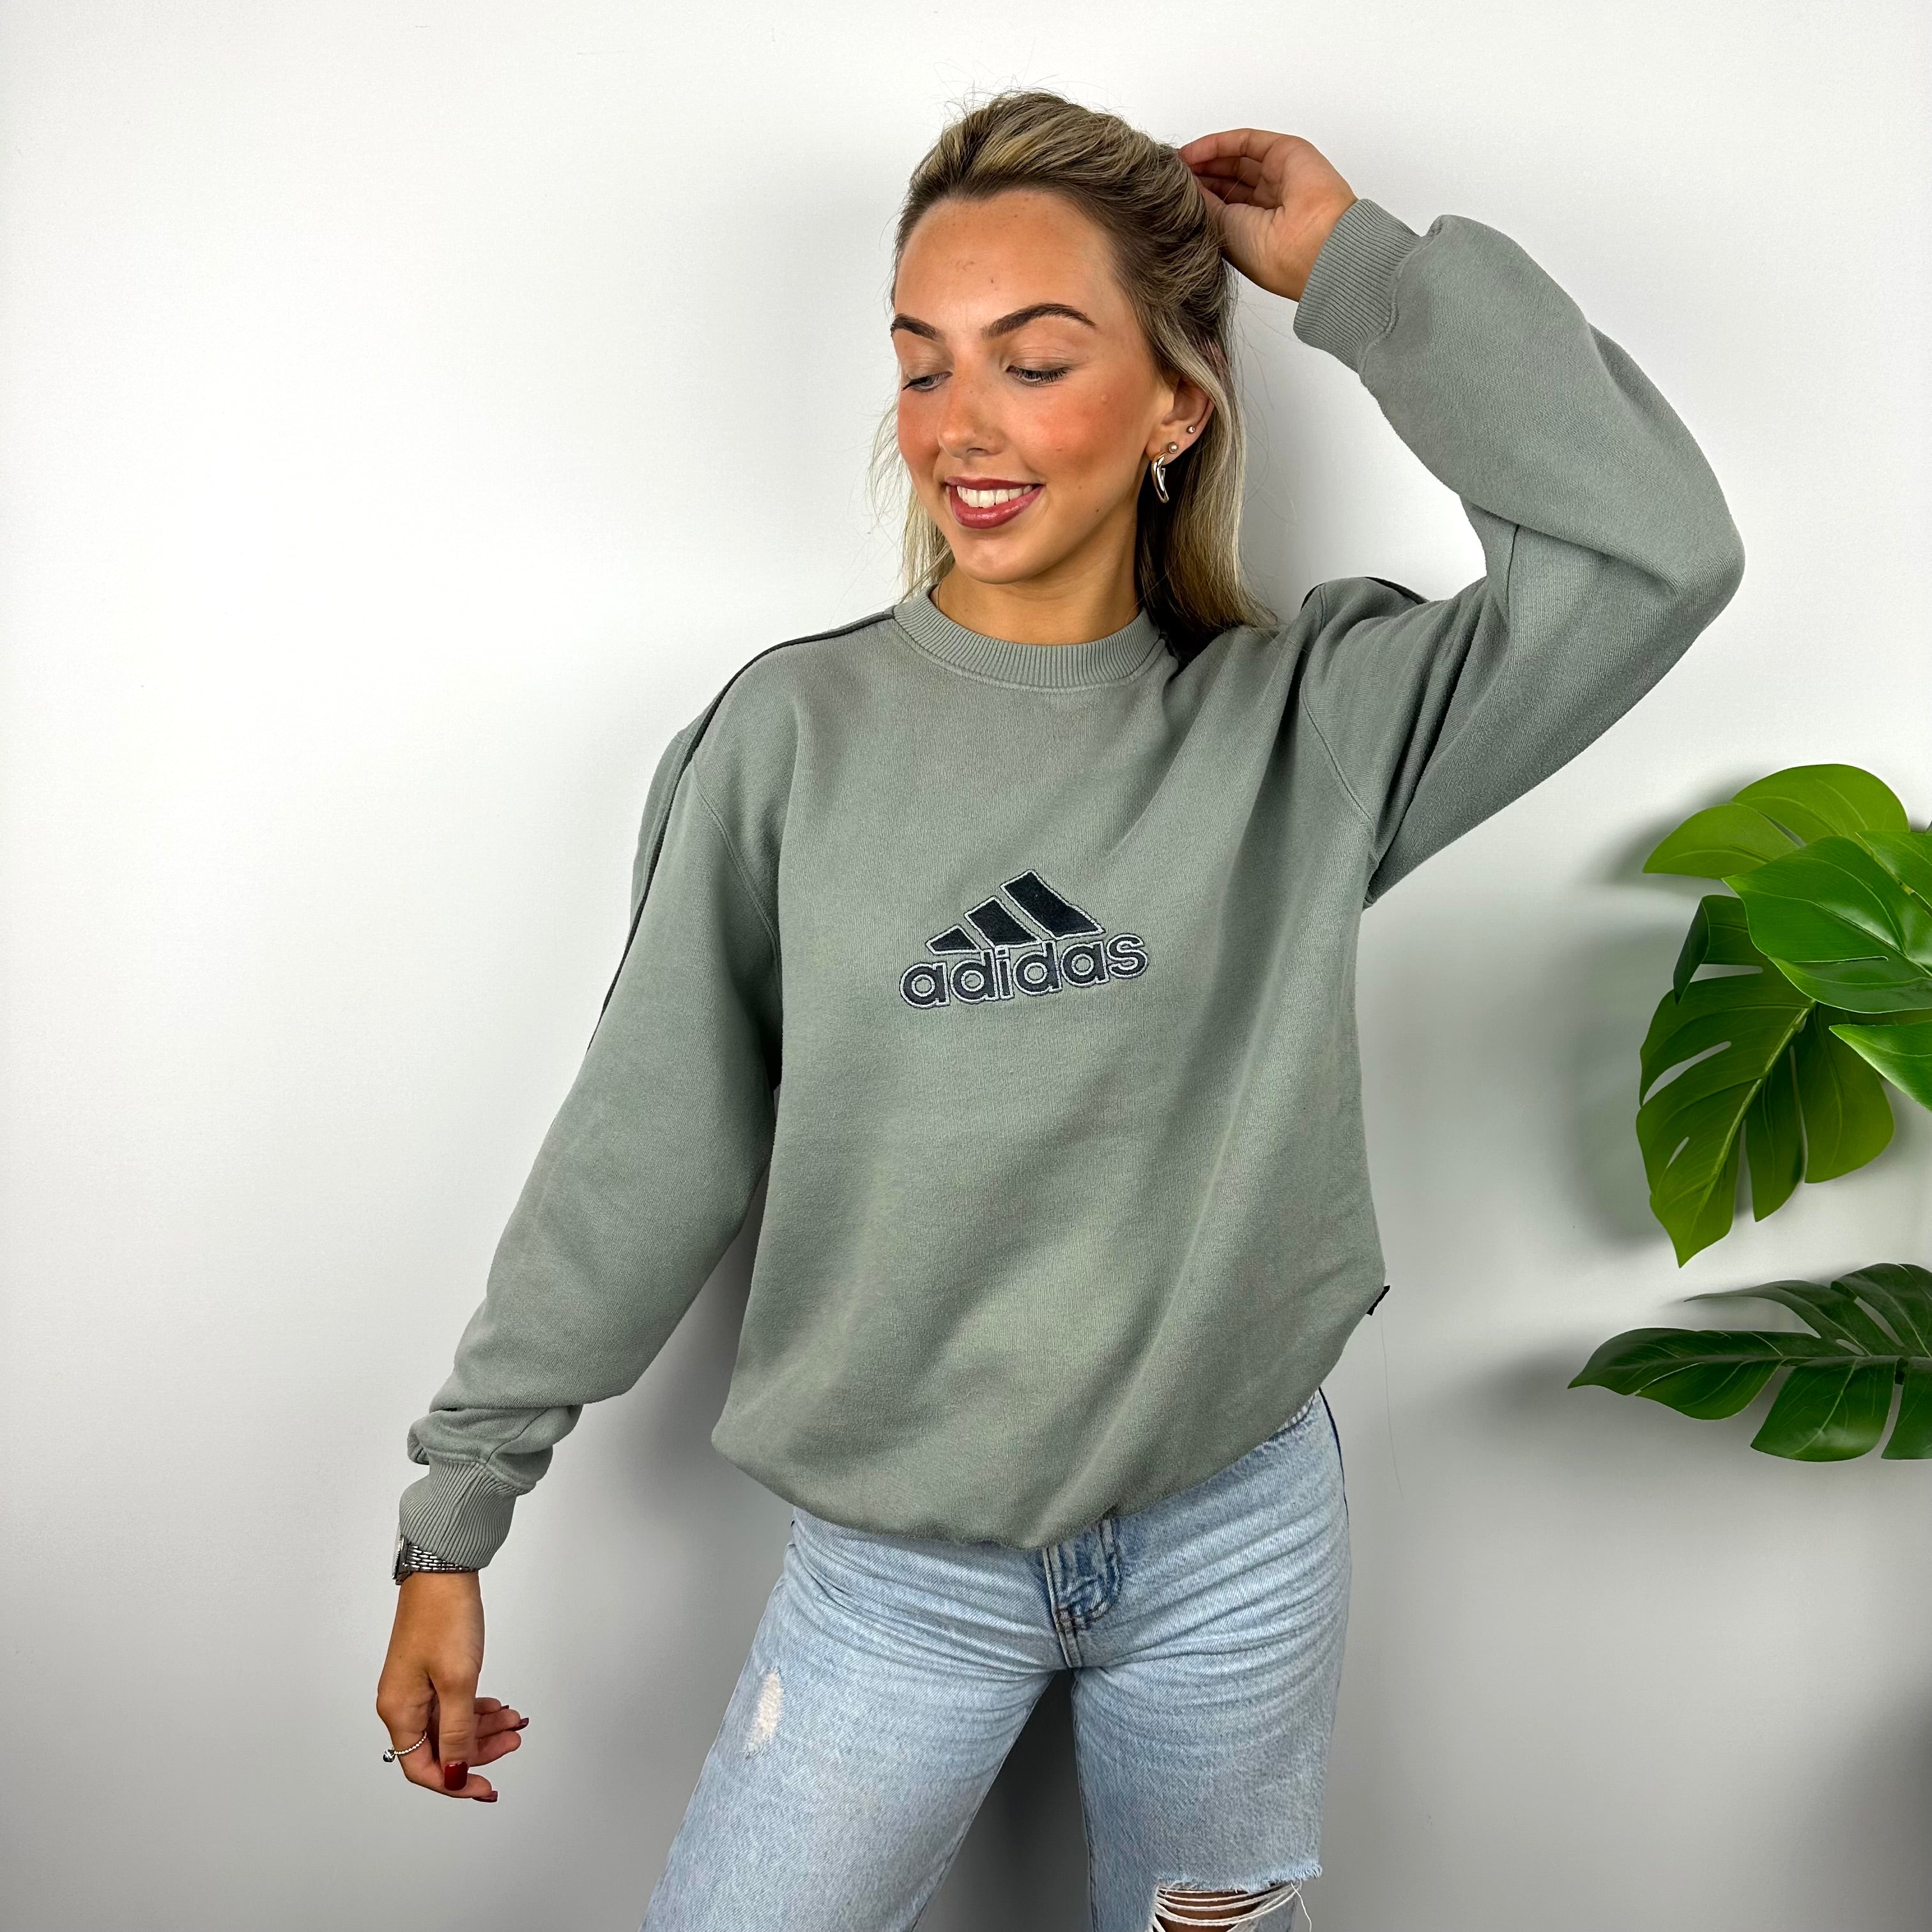 Adidas Sea Green Embroidered Spell Out Sweatshirt (M)